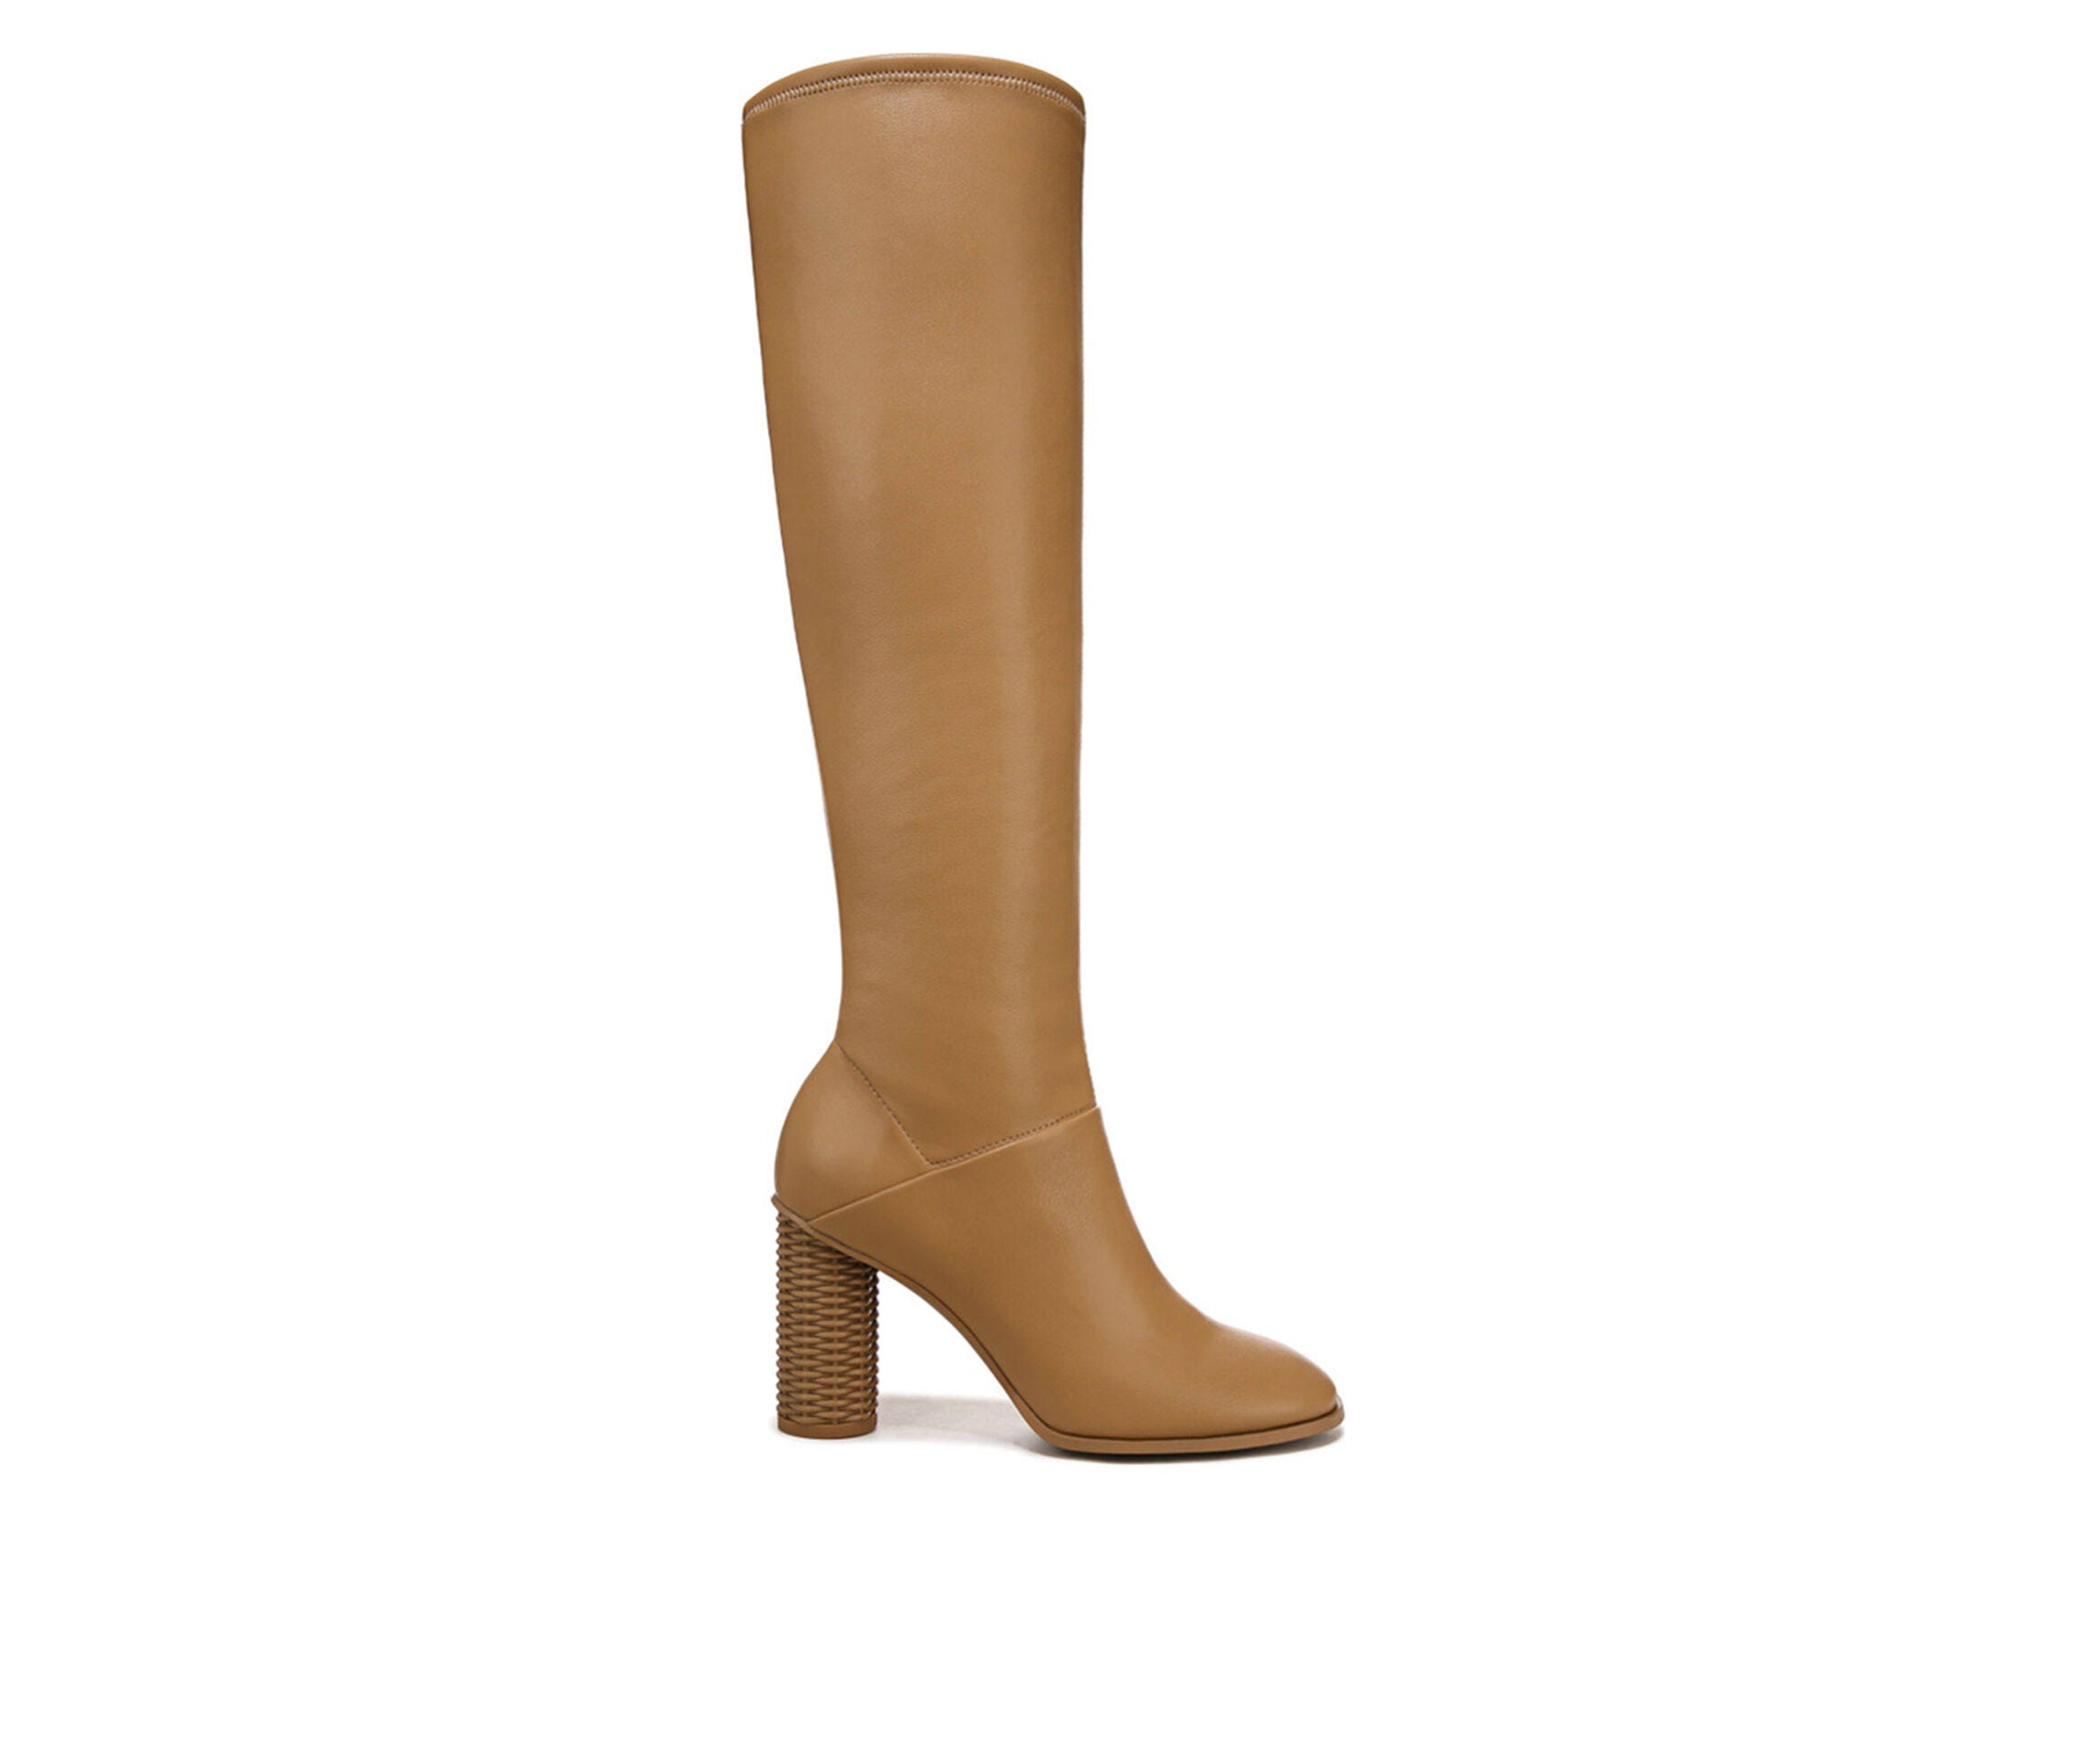 Stylish Beige Knee-High Boots by Franco Sarto | Image